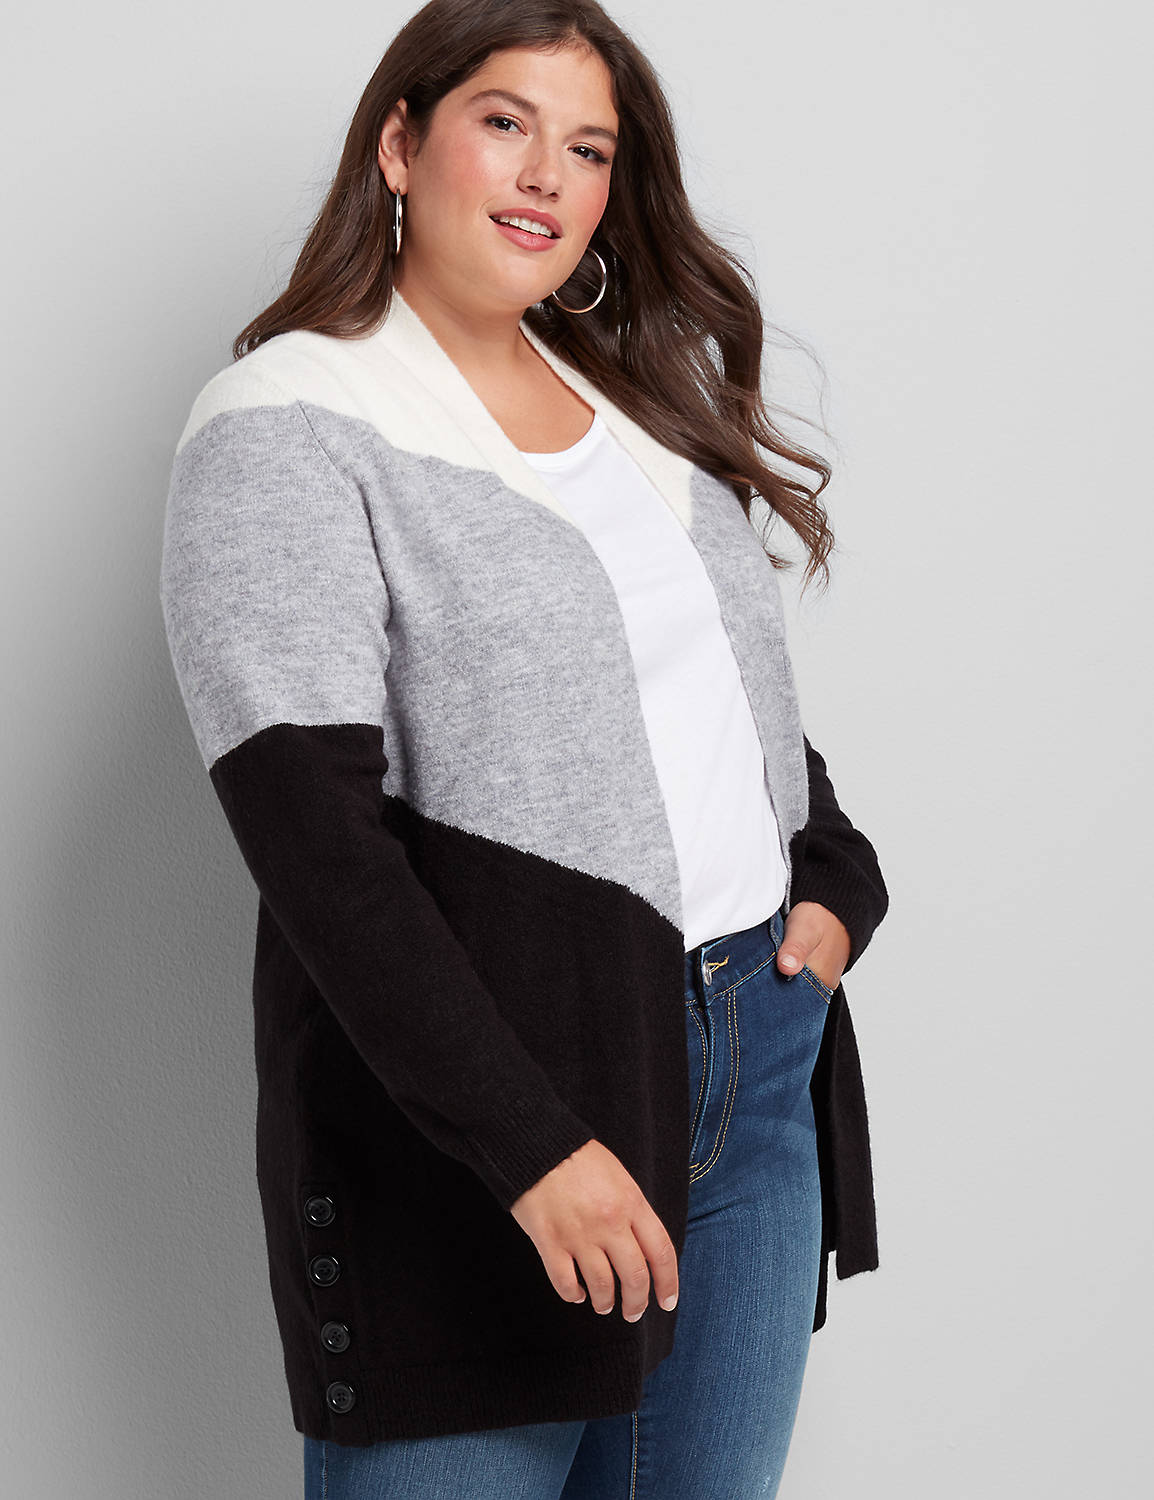 Long Sleeve Open Front Side Button Vent Cardigan :Gardenia/ Med Heather Grey/ Charcoal Heather Stripe:10/12 Product Image 1